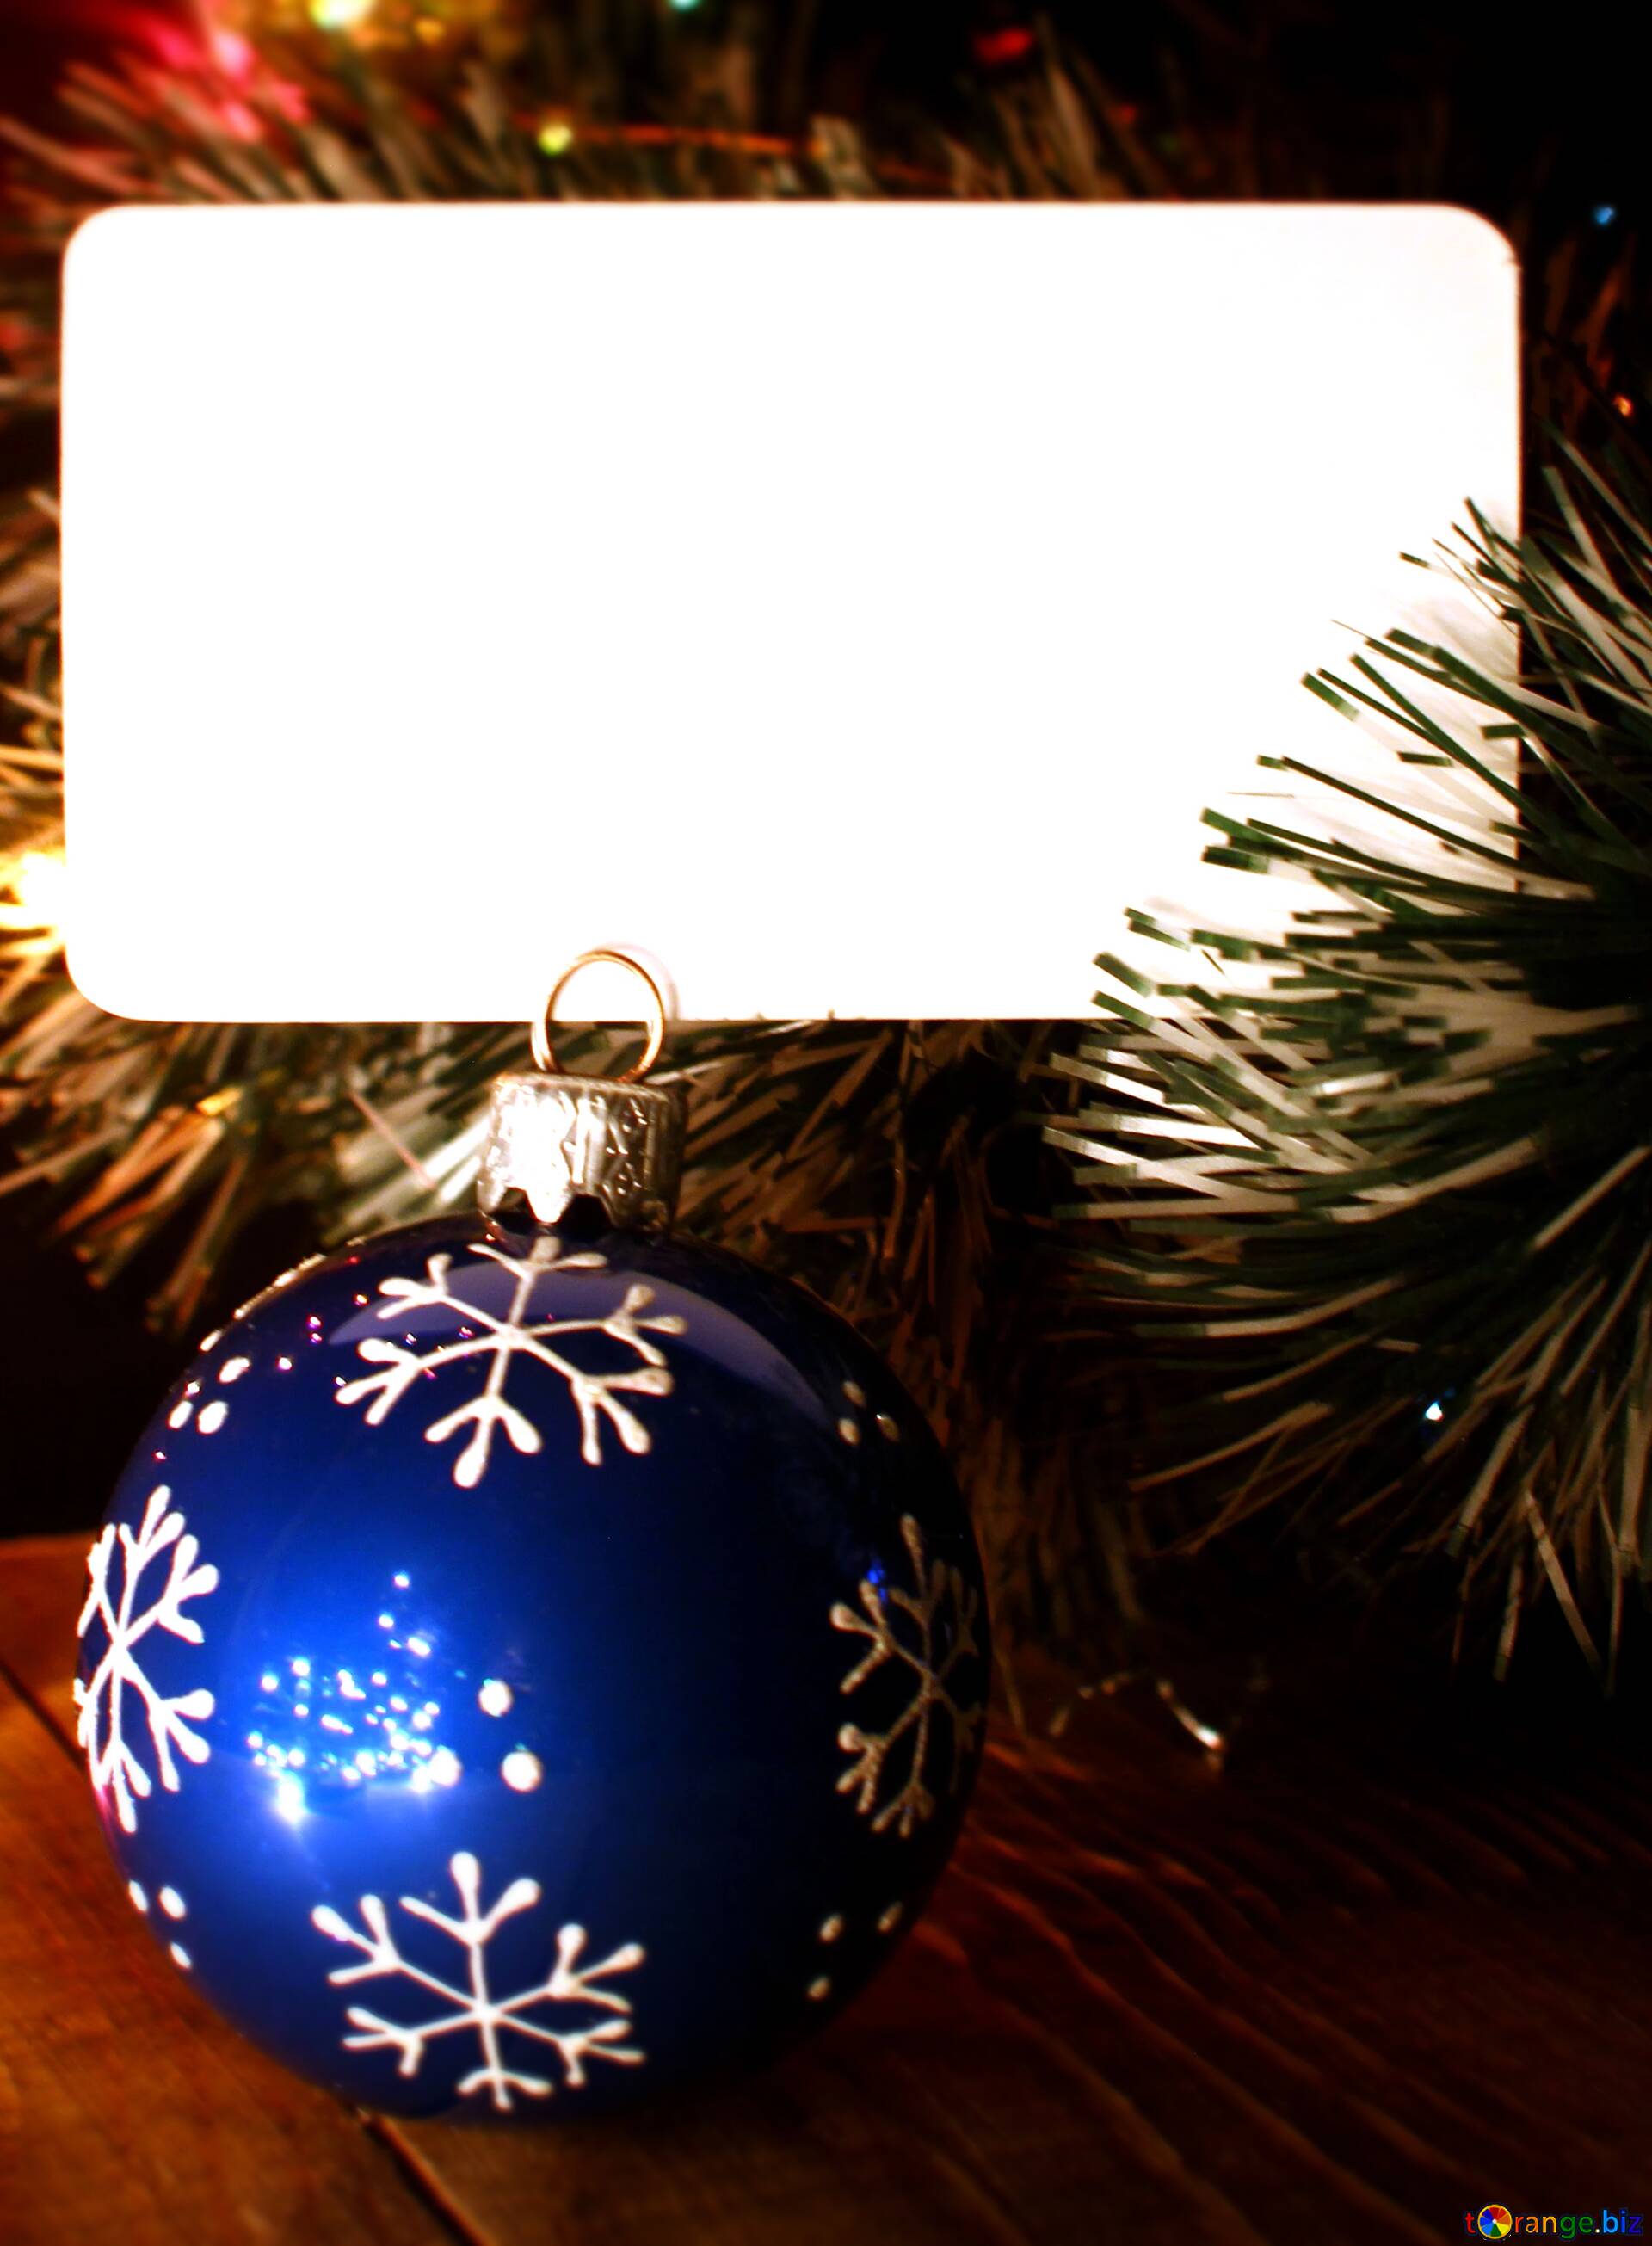 Download free picture Christmas blank invitation on CC-BY License ~ Free  Image Stock  ~ fx №2058